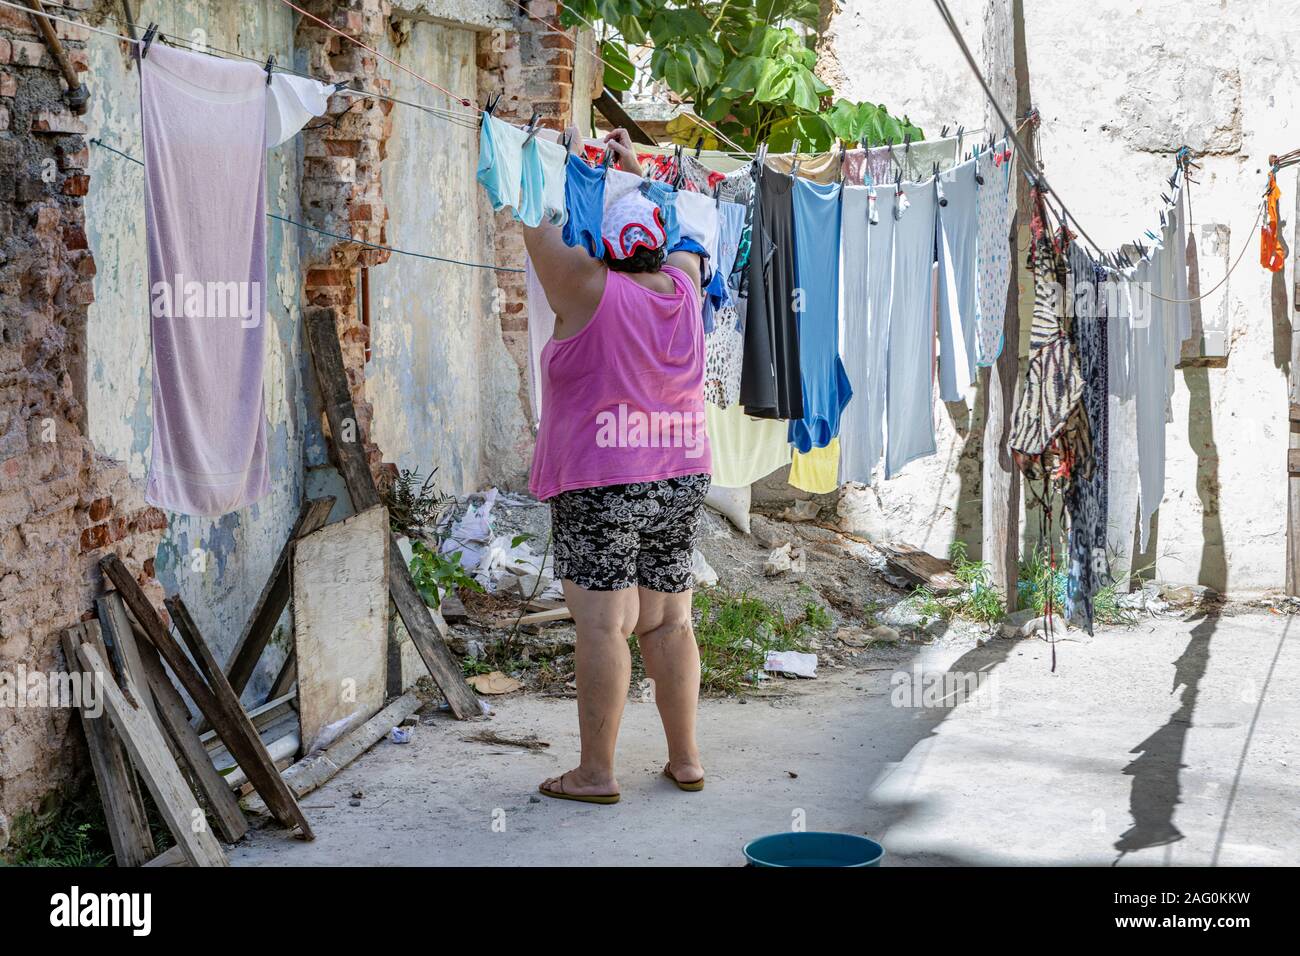 A lady hanging out her washing in Central Havana, Cuba. Stock Photo